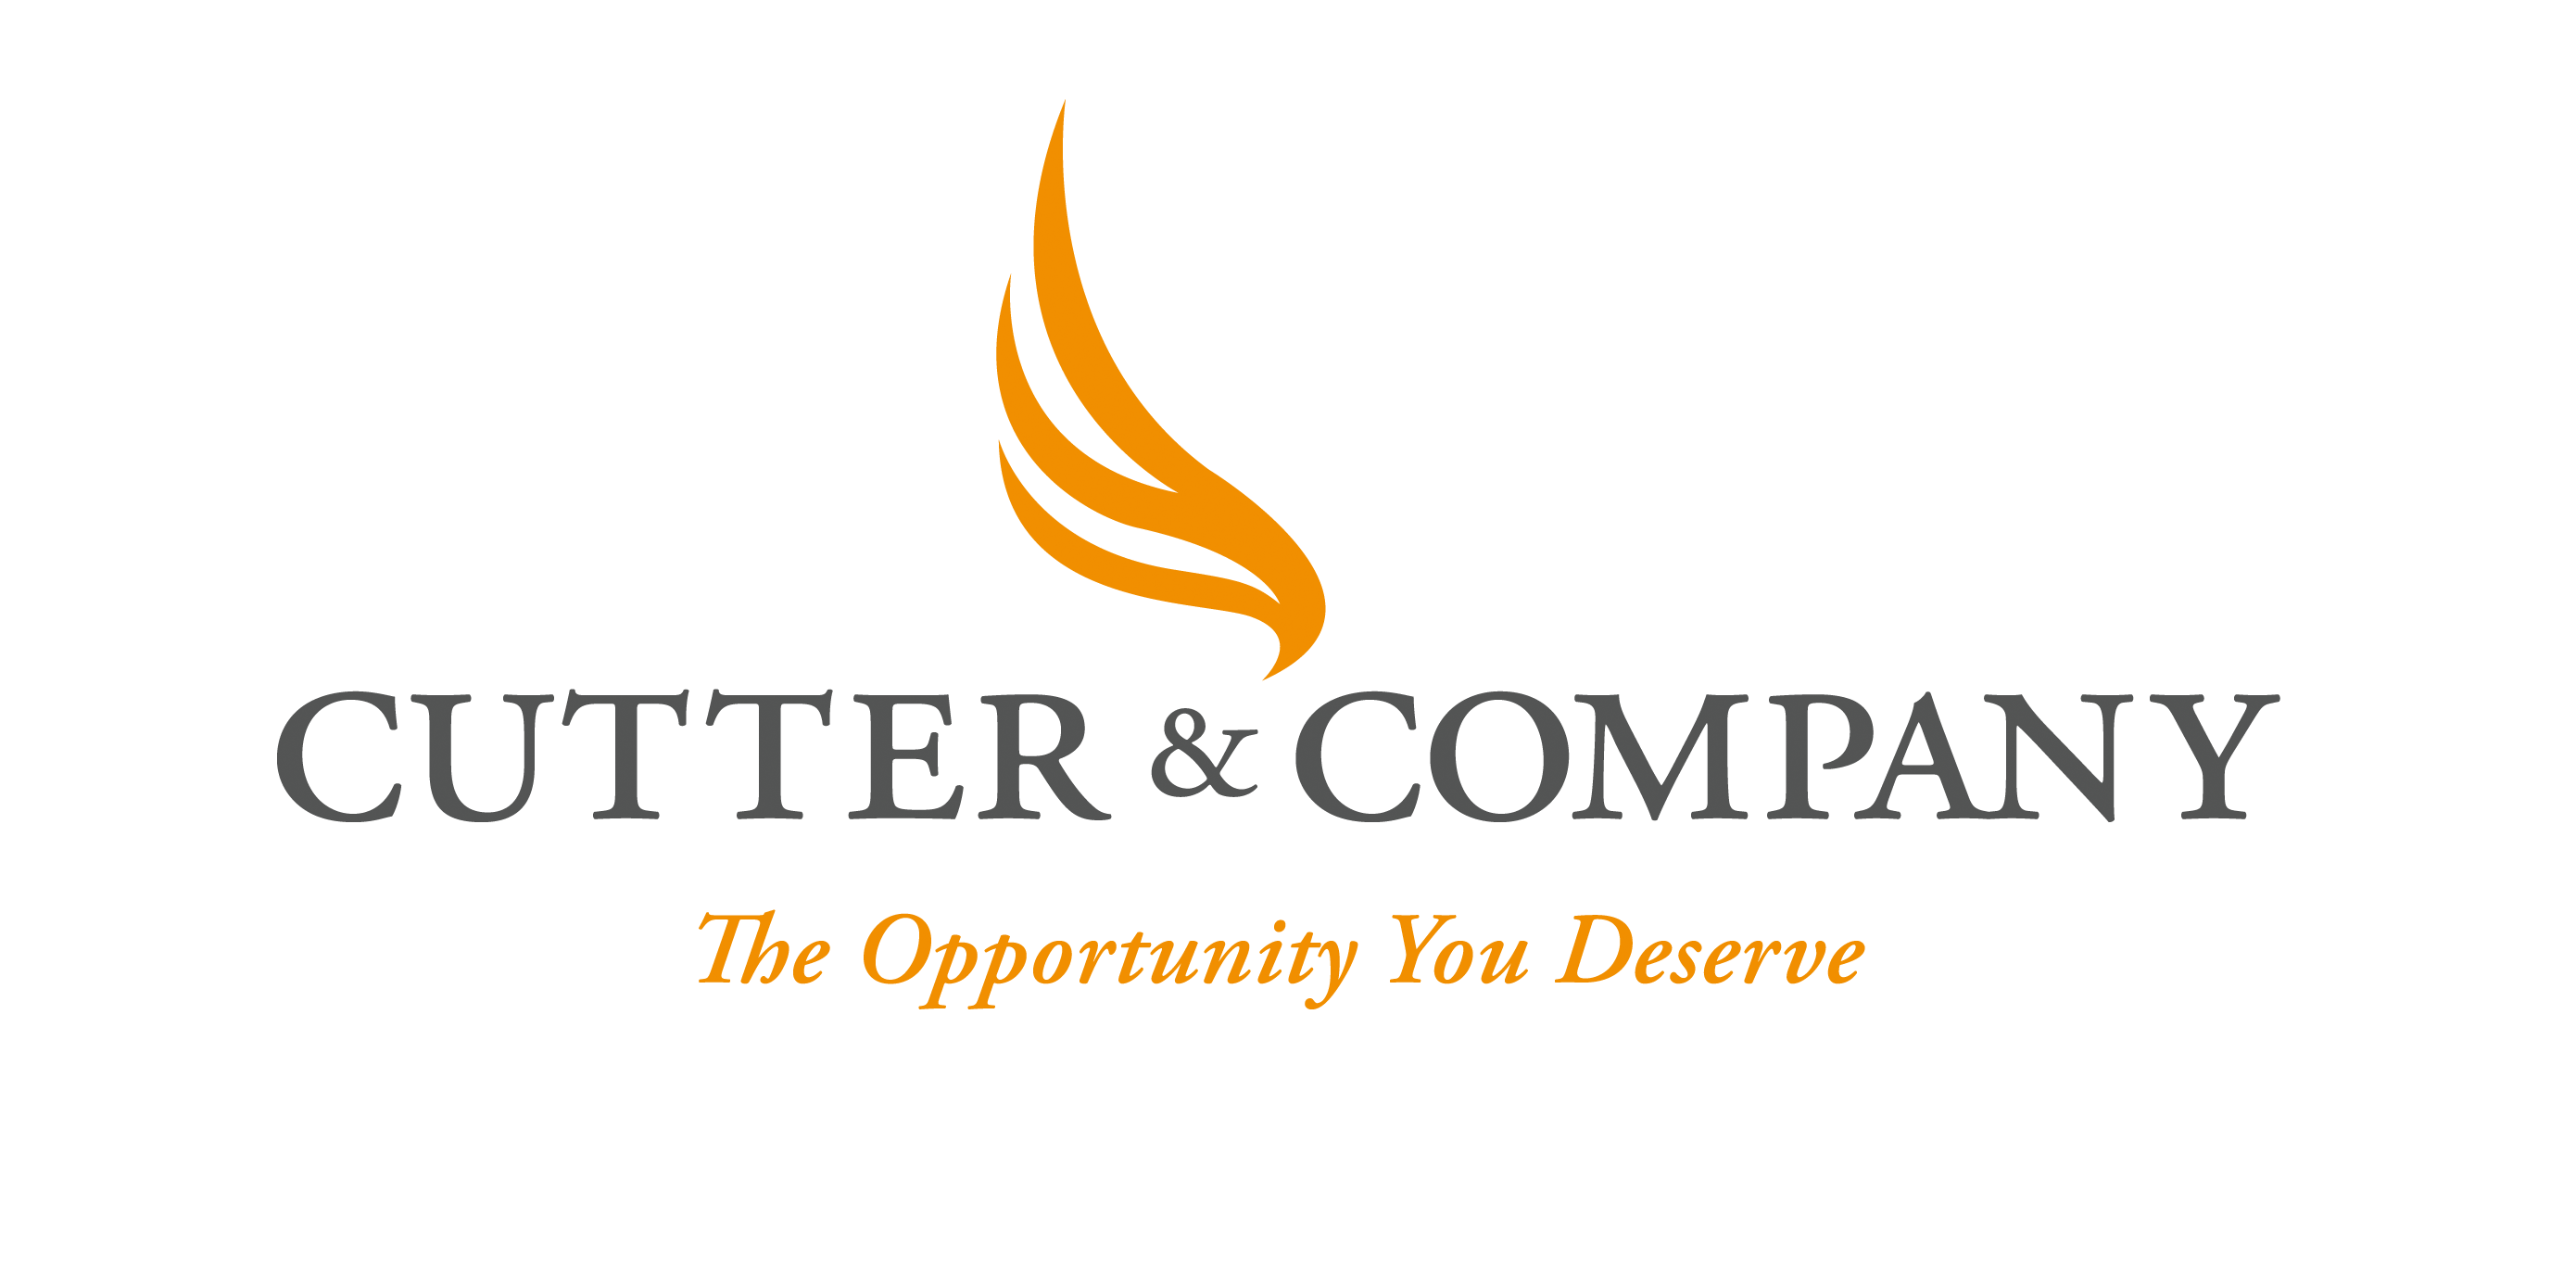 Cutter & Company supports independent financial advisor practices by providing complete back office support, access to multiple custodians, a myriad of financial products, and compliance support.